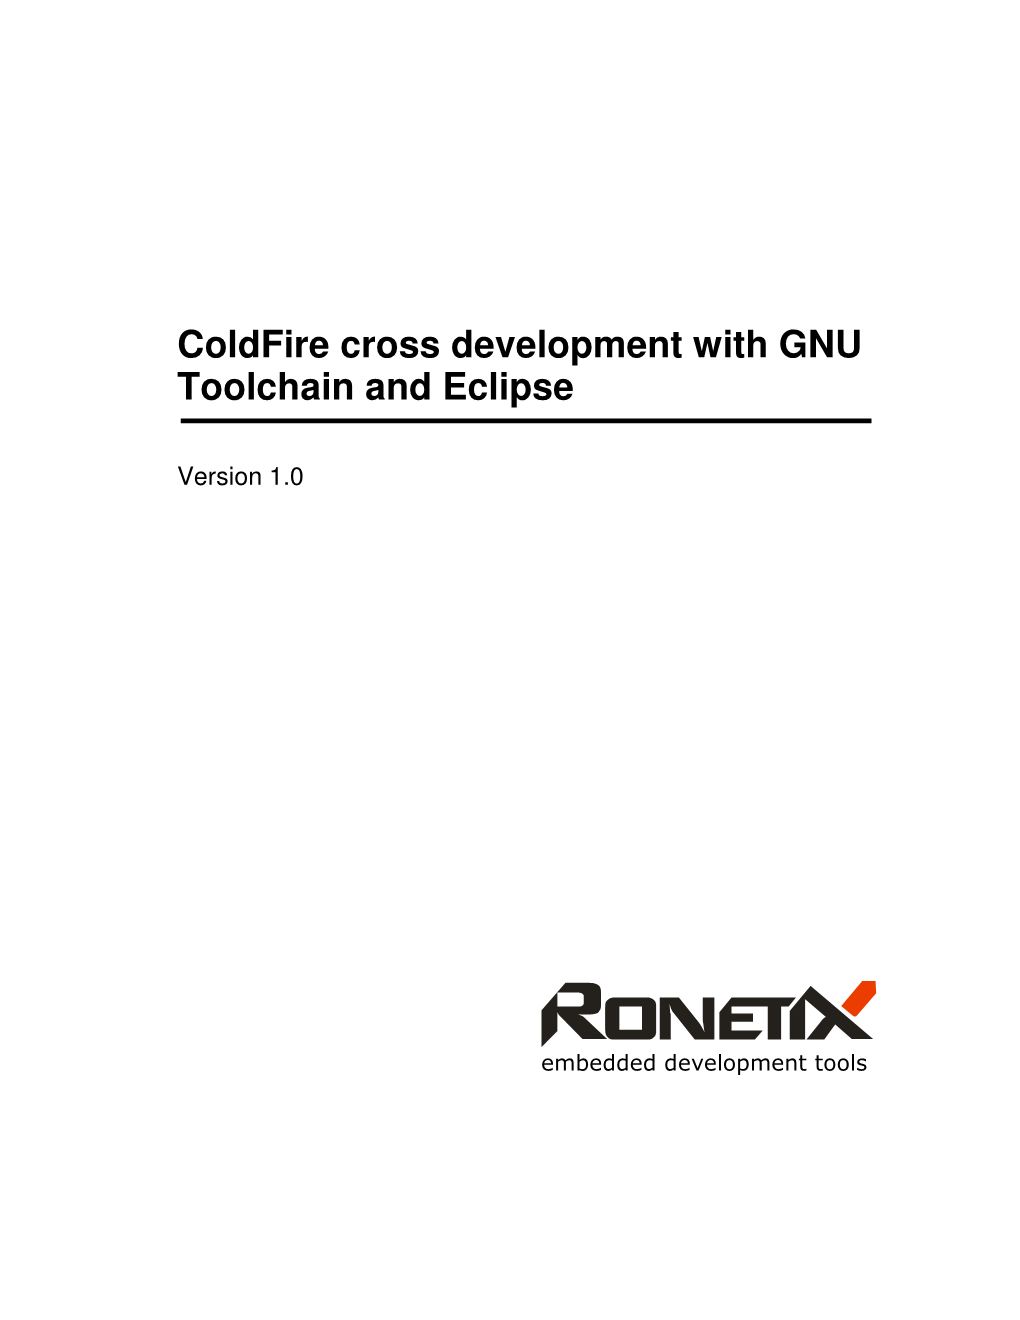 Coldfire Cross Development with GNU Toolchain and Eclipse